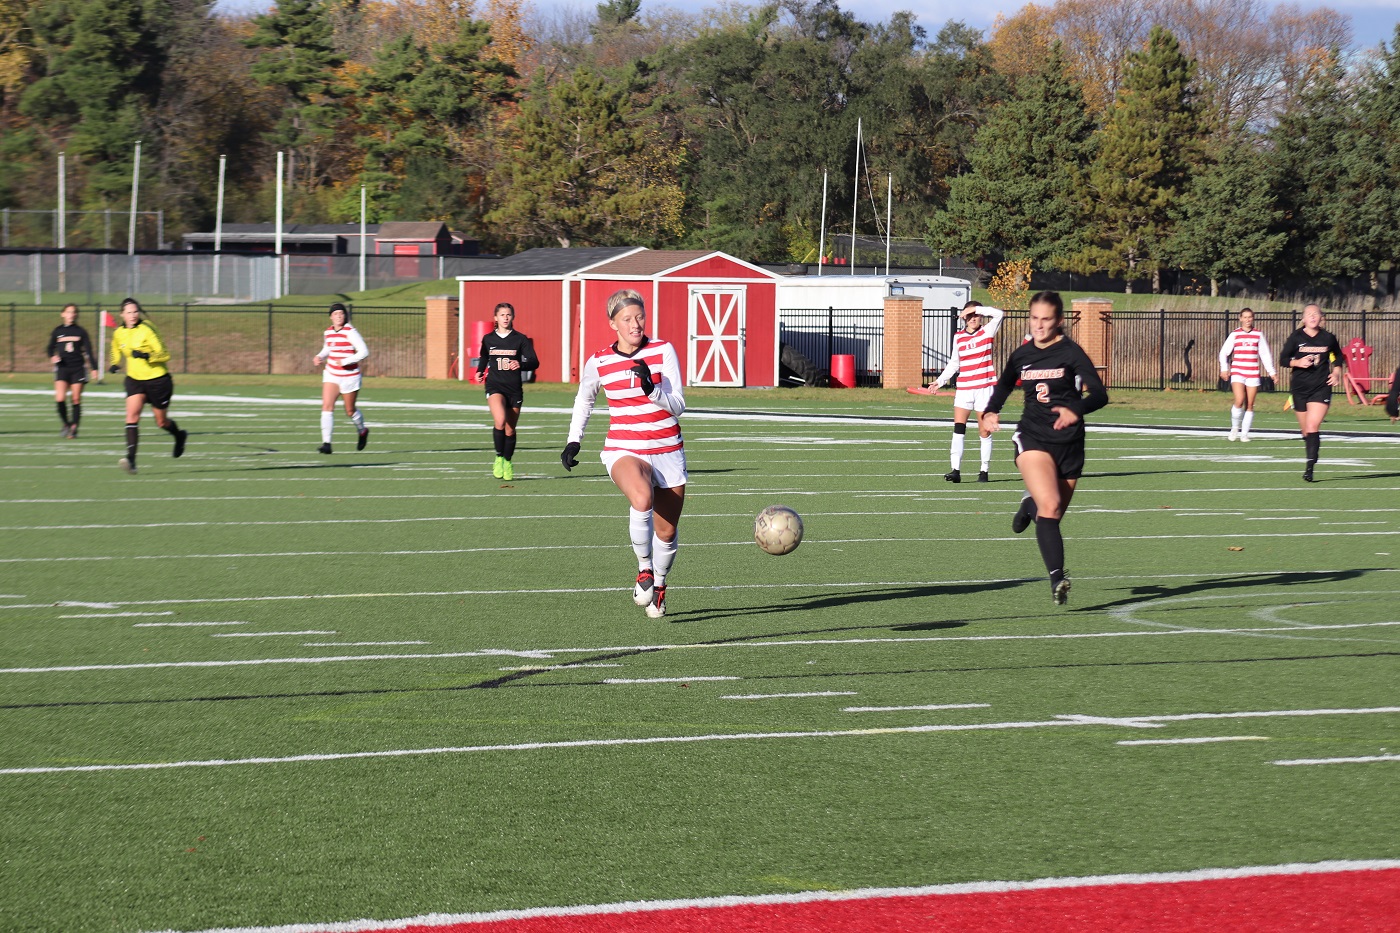 Kendra Lewis recorded her third game winning goal of the season.